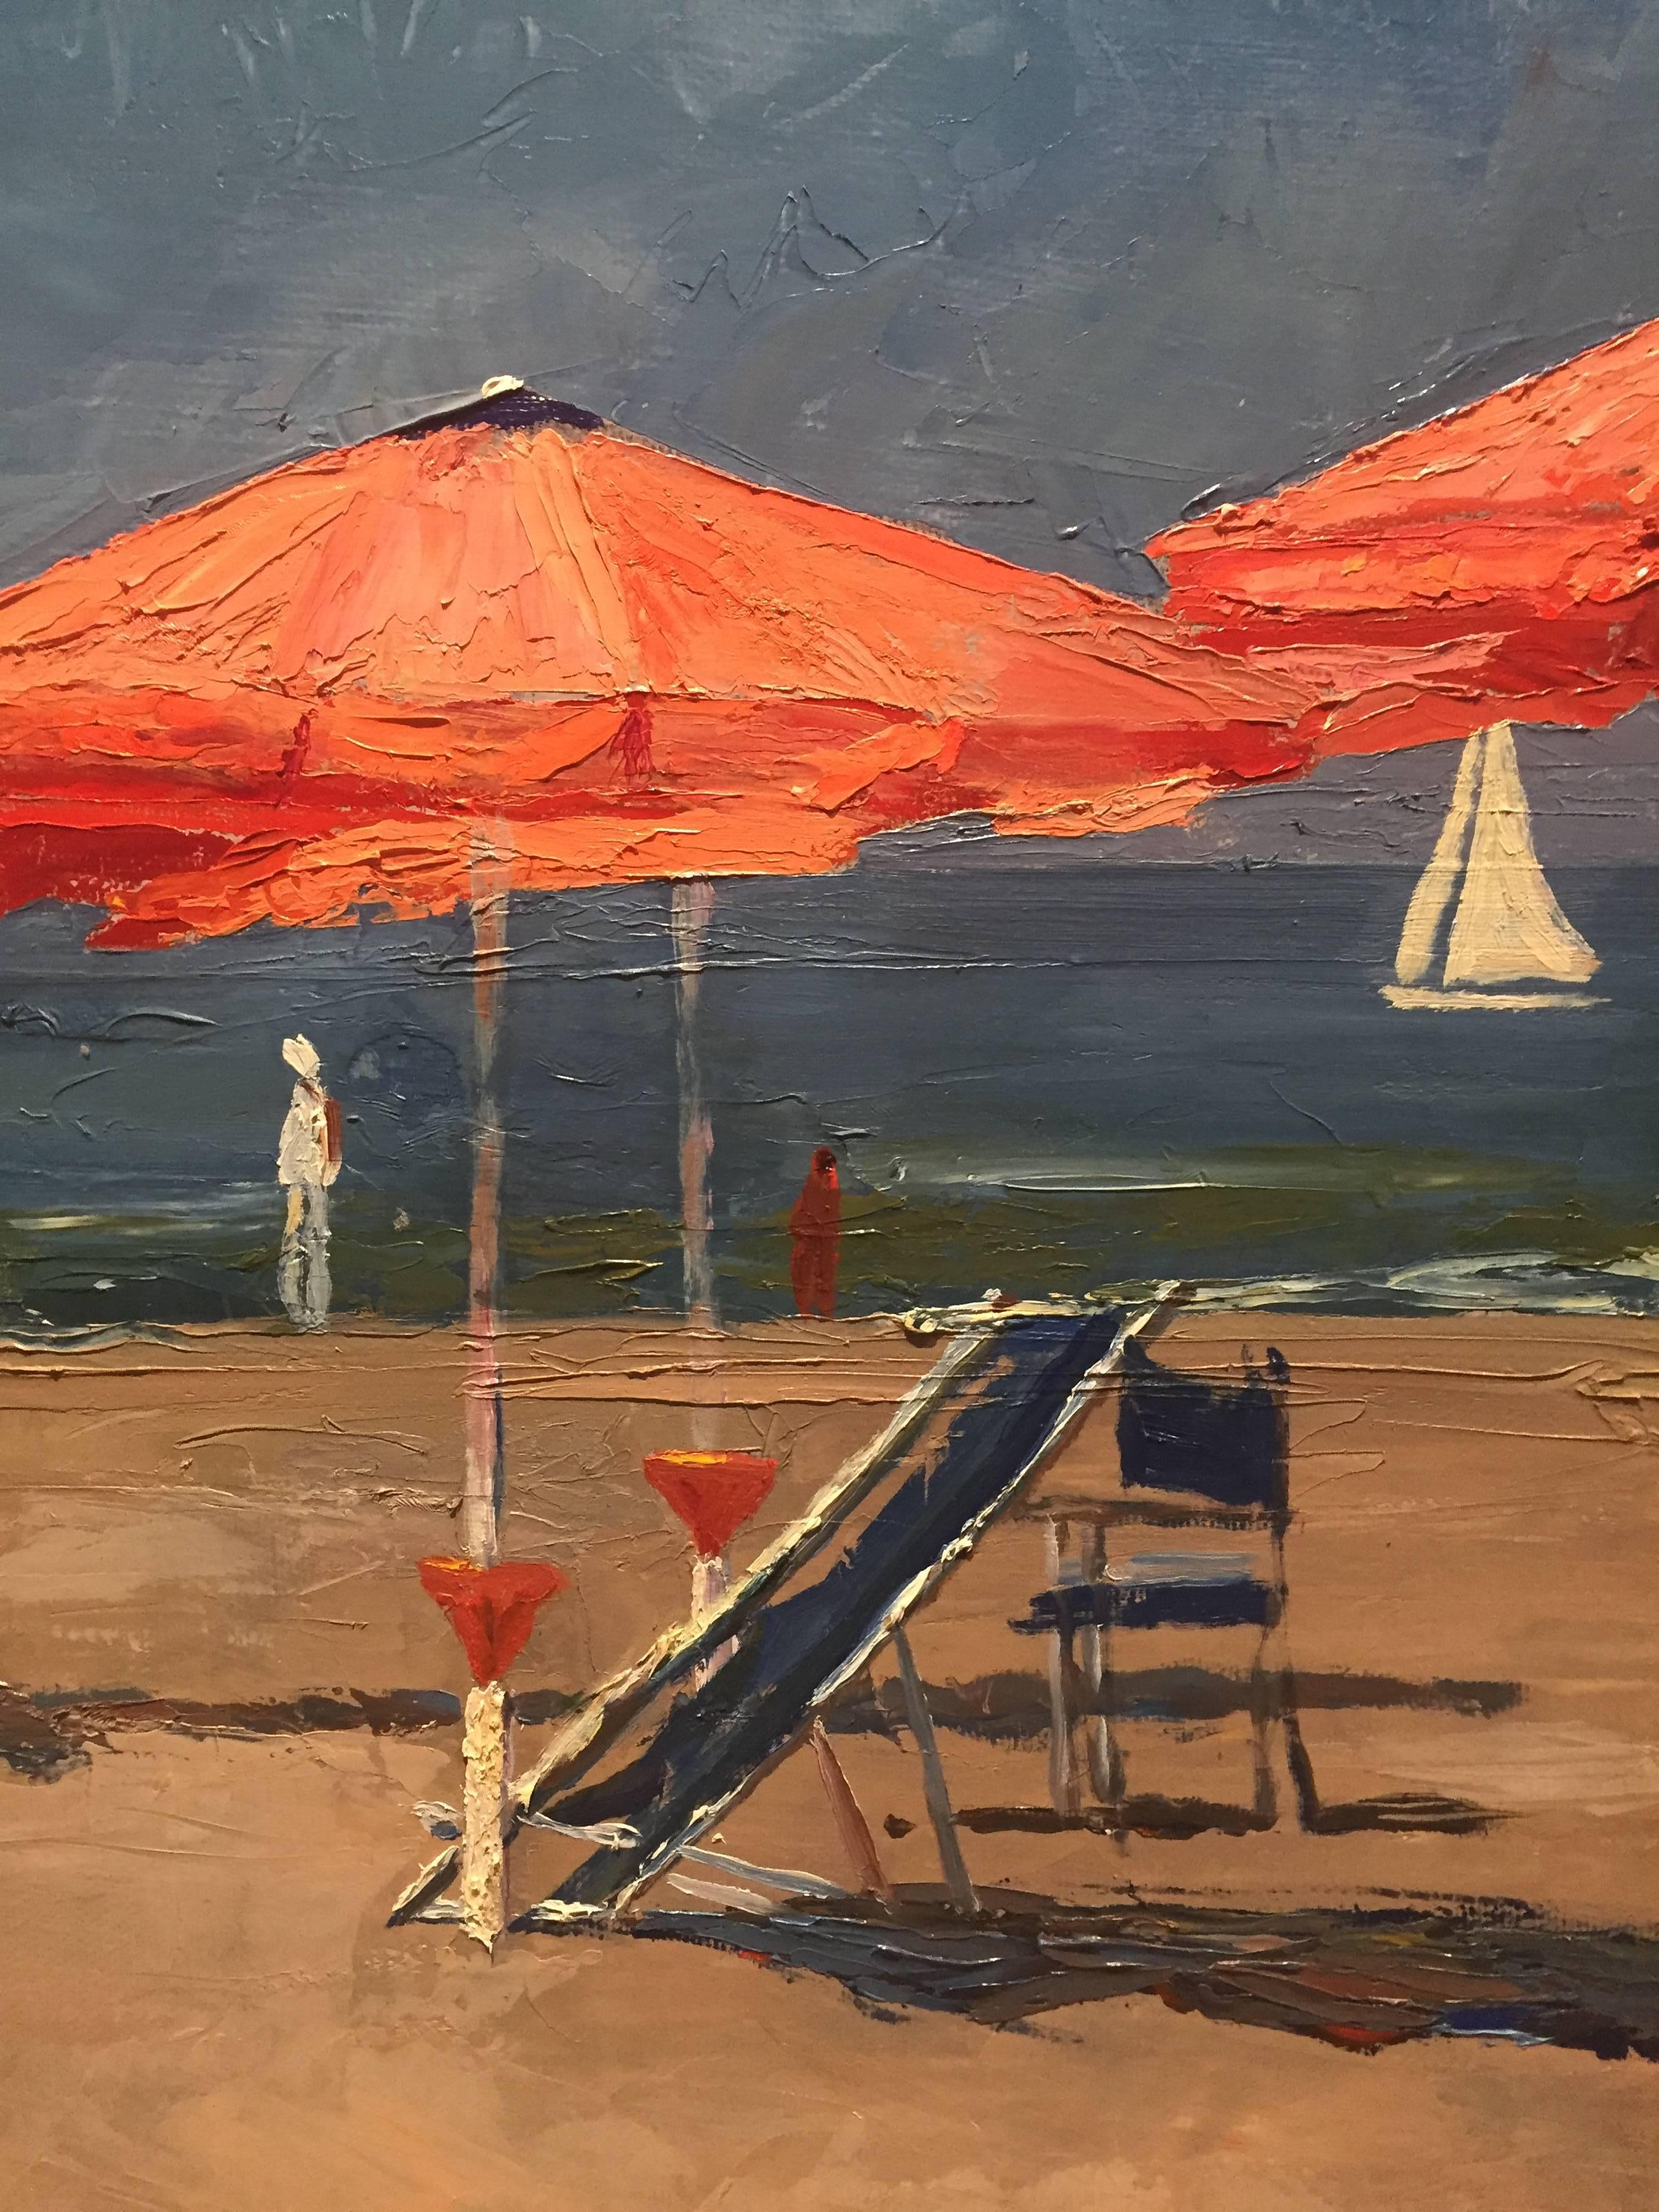 En plein air on a beach in Italy, Nelson H. White chooses to paint his favorite subject, Beach Umbrellas. Pinks and oranges create a wide sandy foreground. Figures walk along the shoreline. The ocean is painted in dark greens and cascades into a